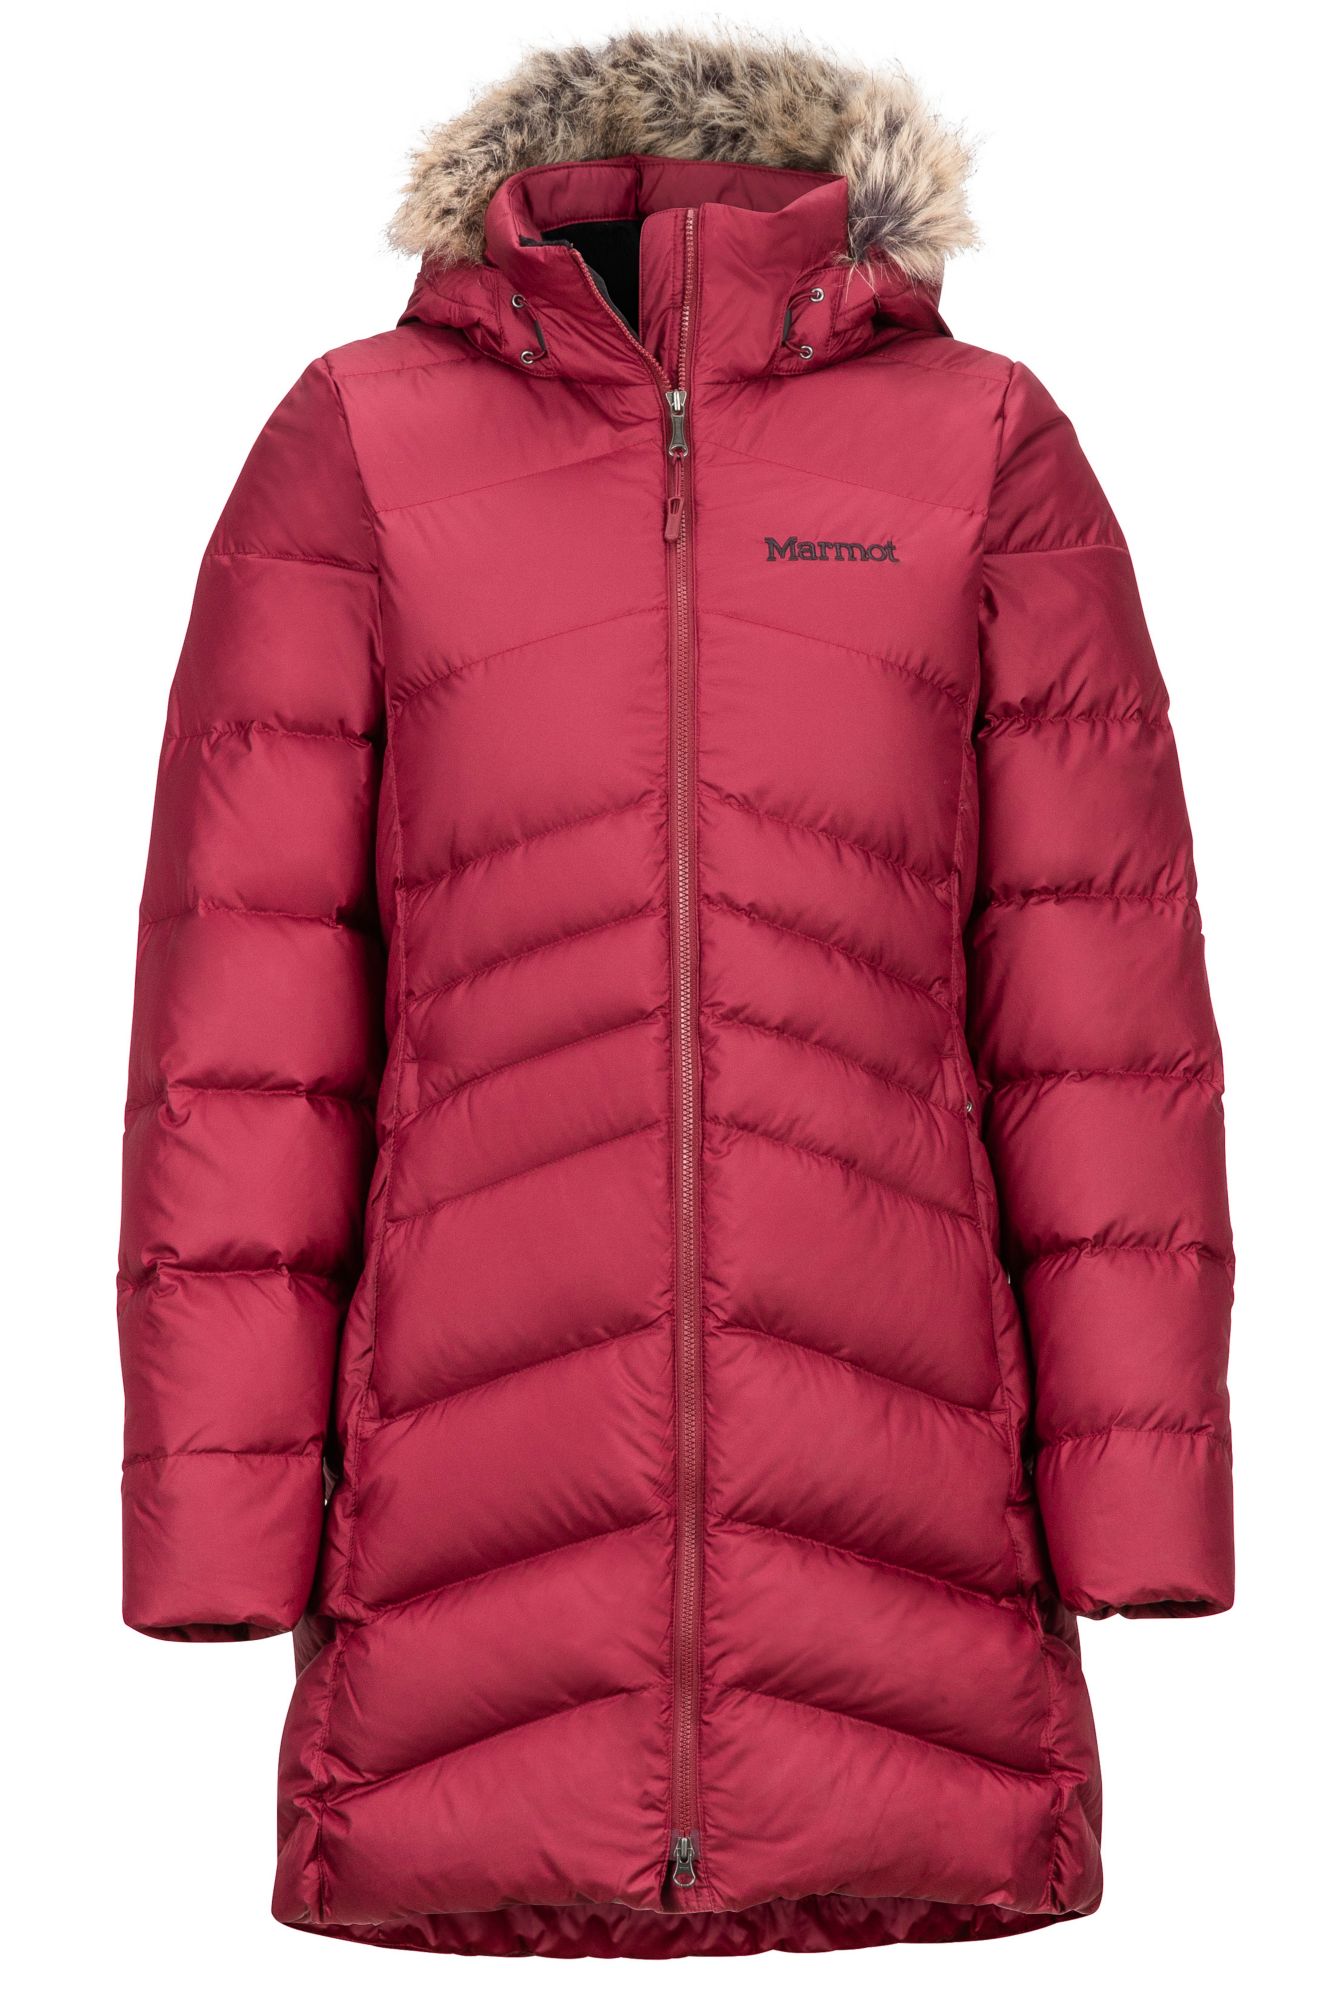 Marmot Outdoor Clothing Gear For Hiking Travel Snowsports